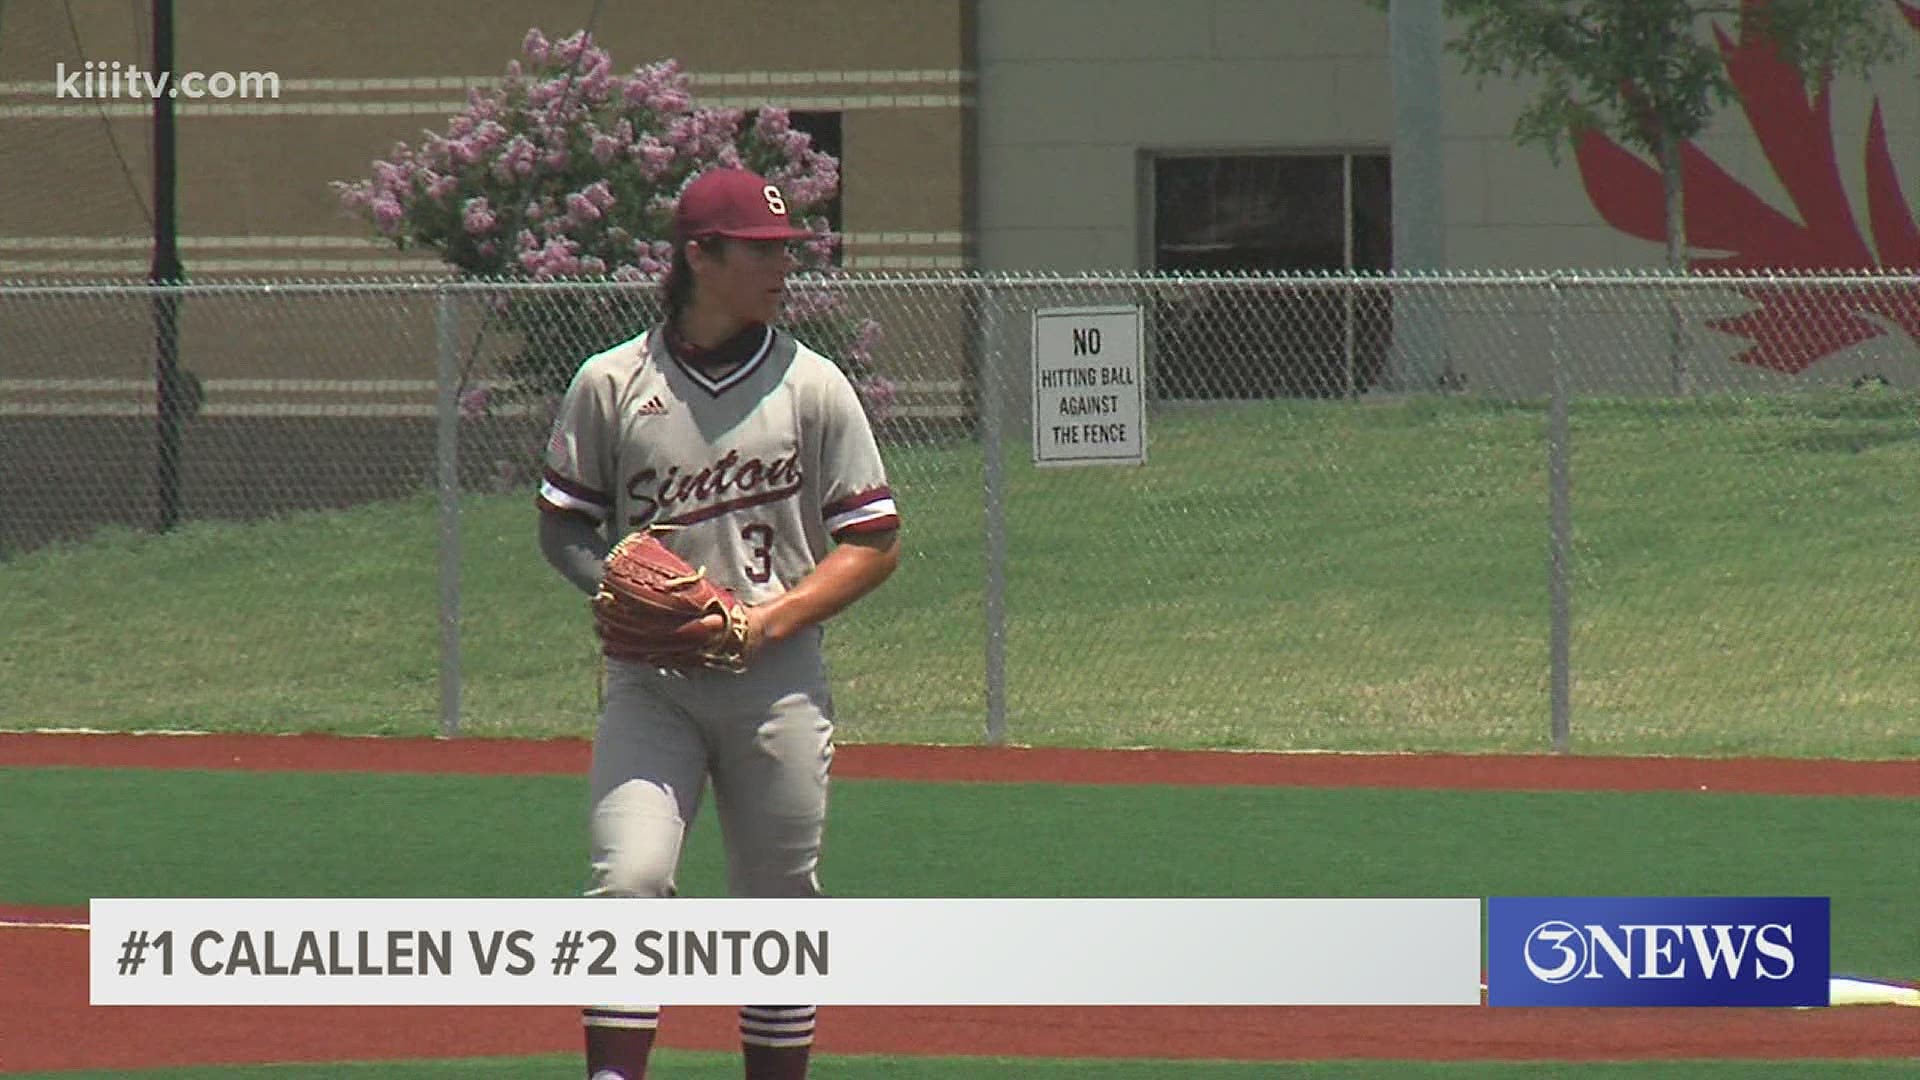 Two thousand tickets were sold for Saturday's game in Laredo featuring the Sinton Pirates and the Calallen Wildcats.